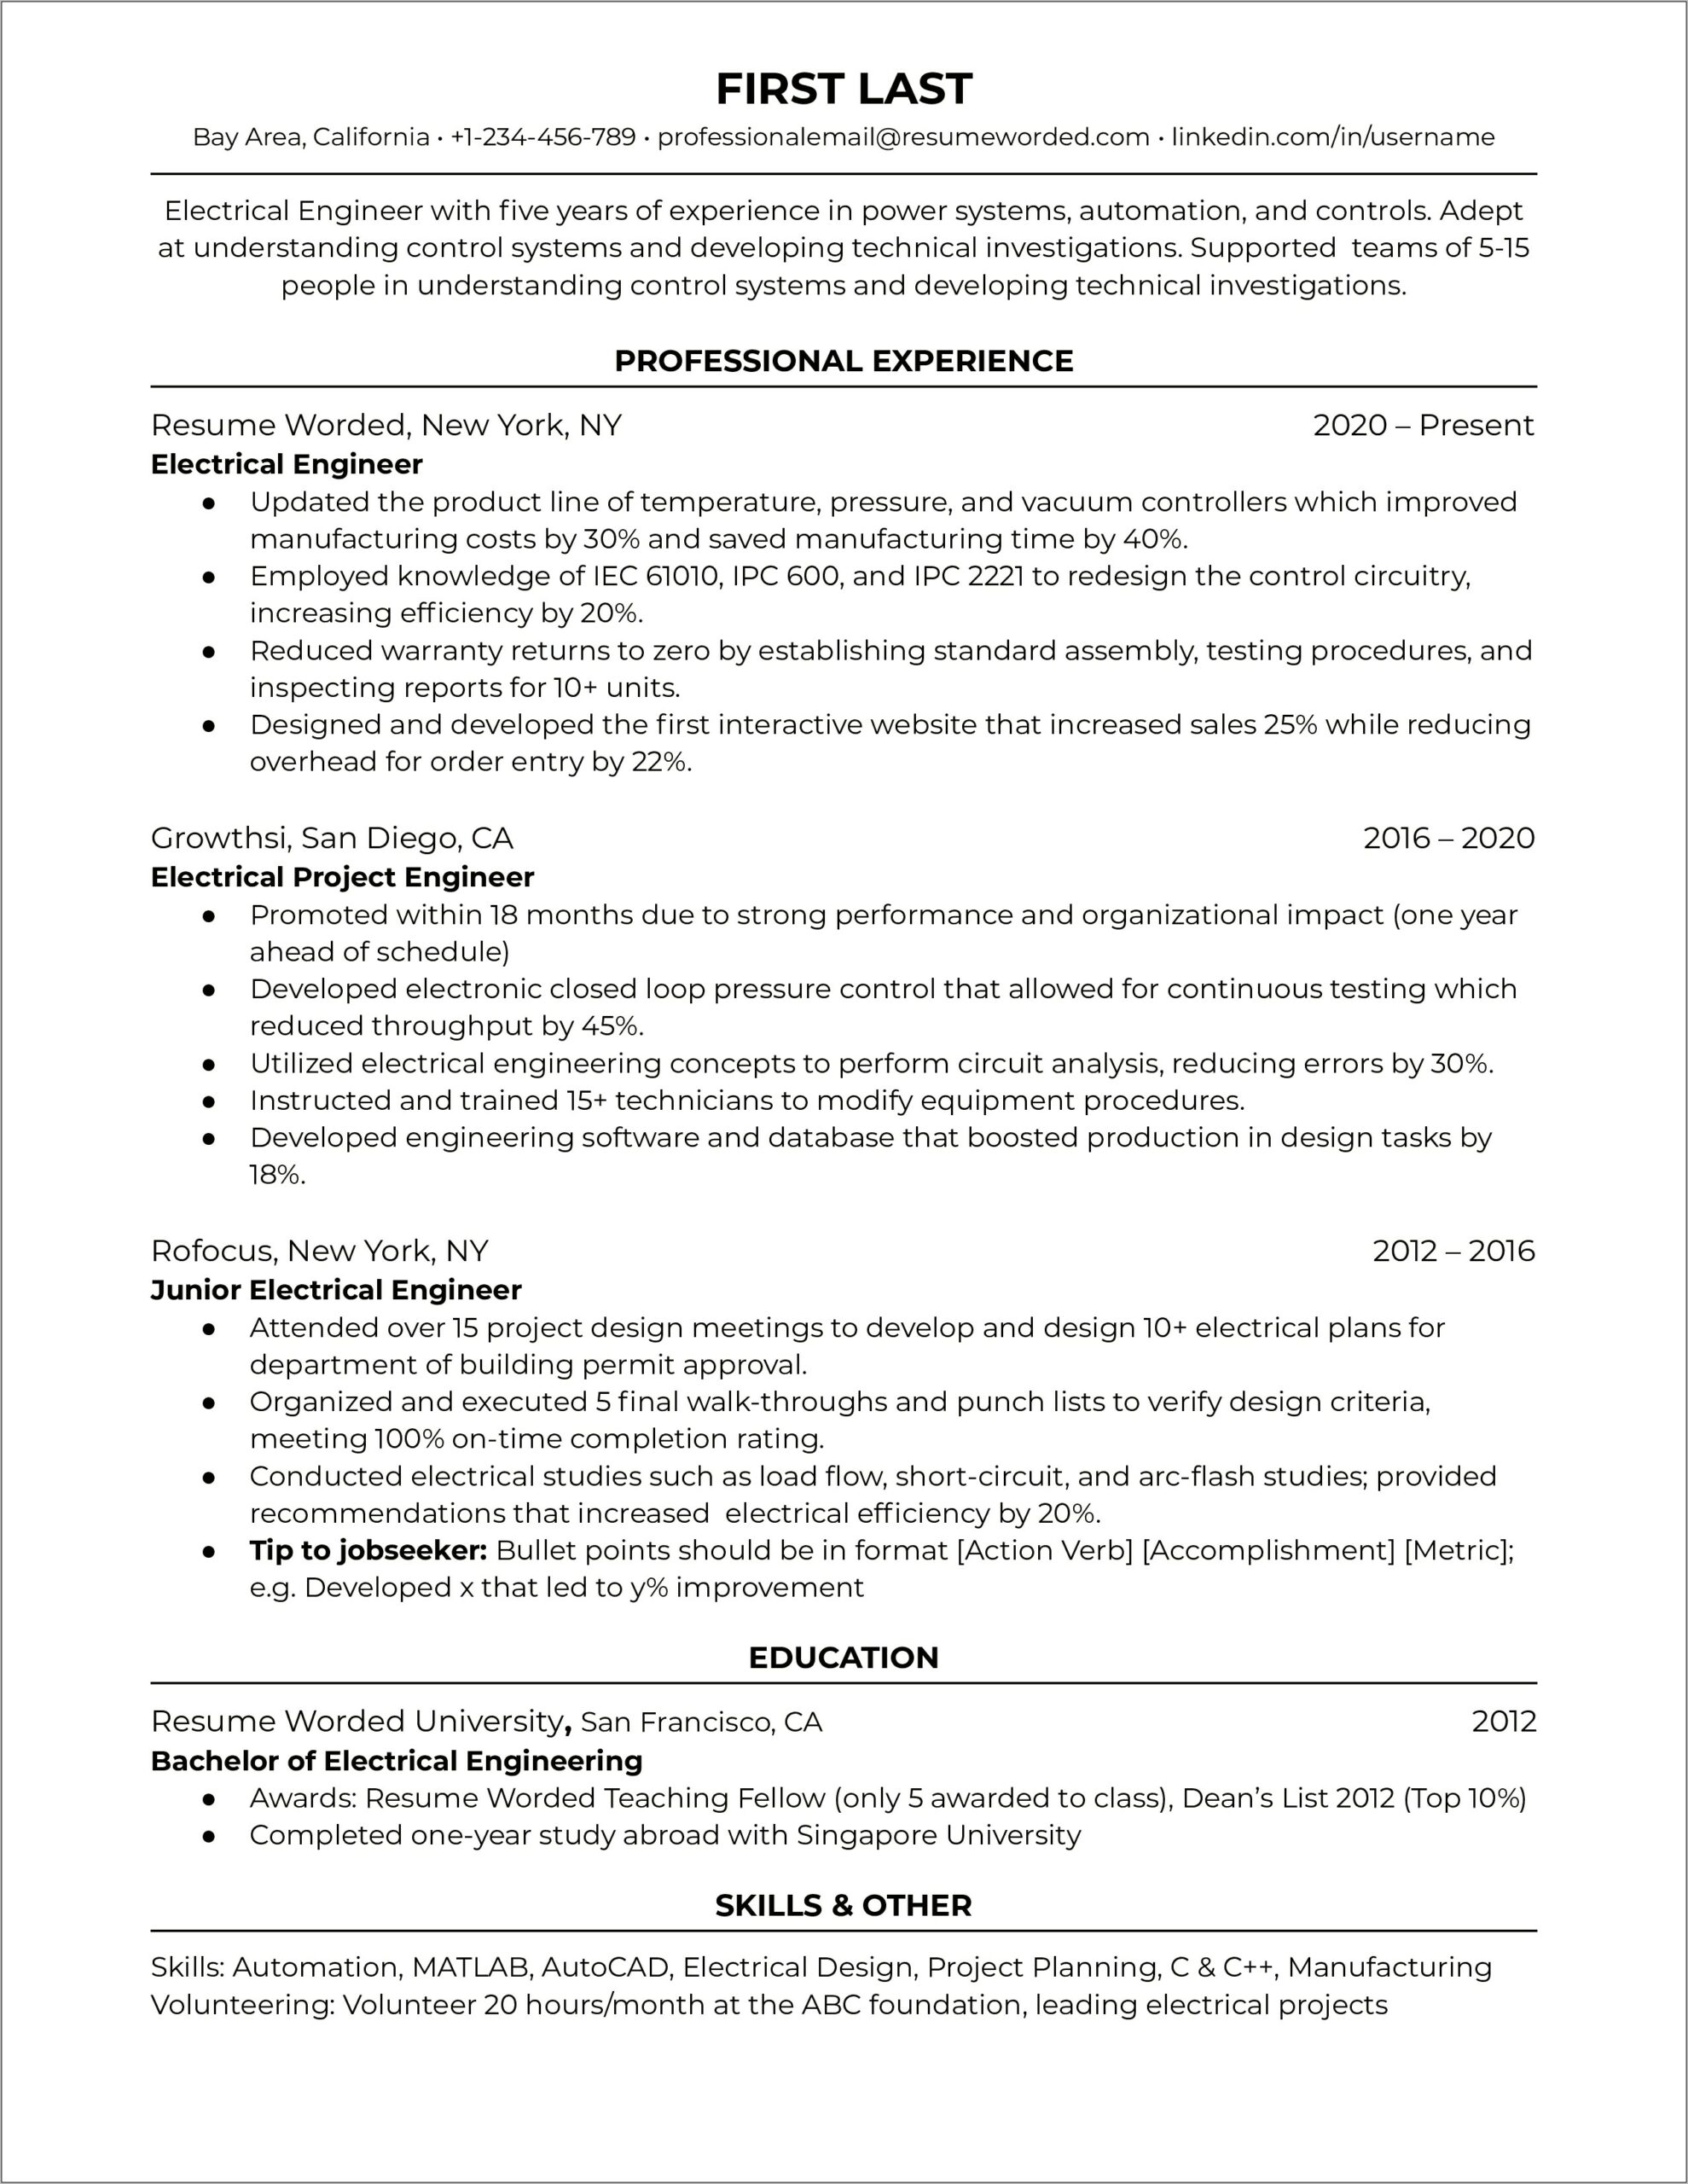 Automation Engineer Resume Objective Statement